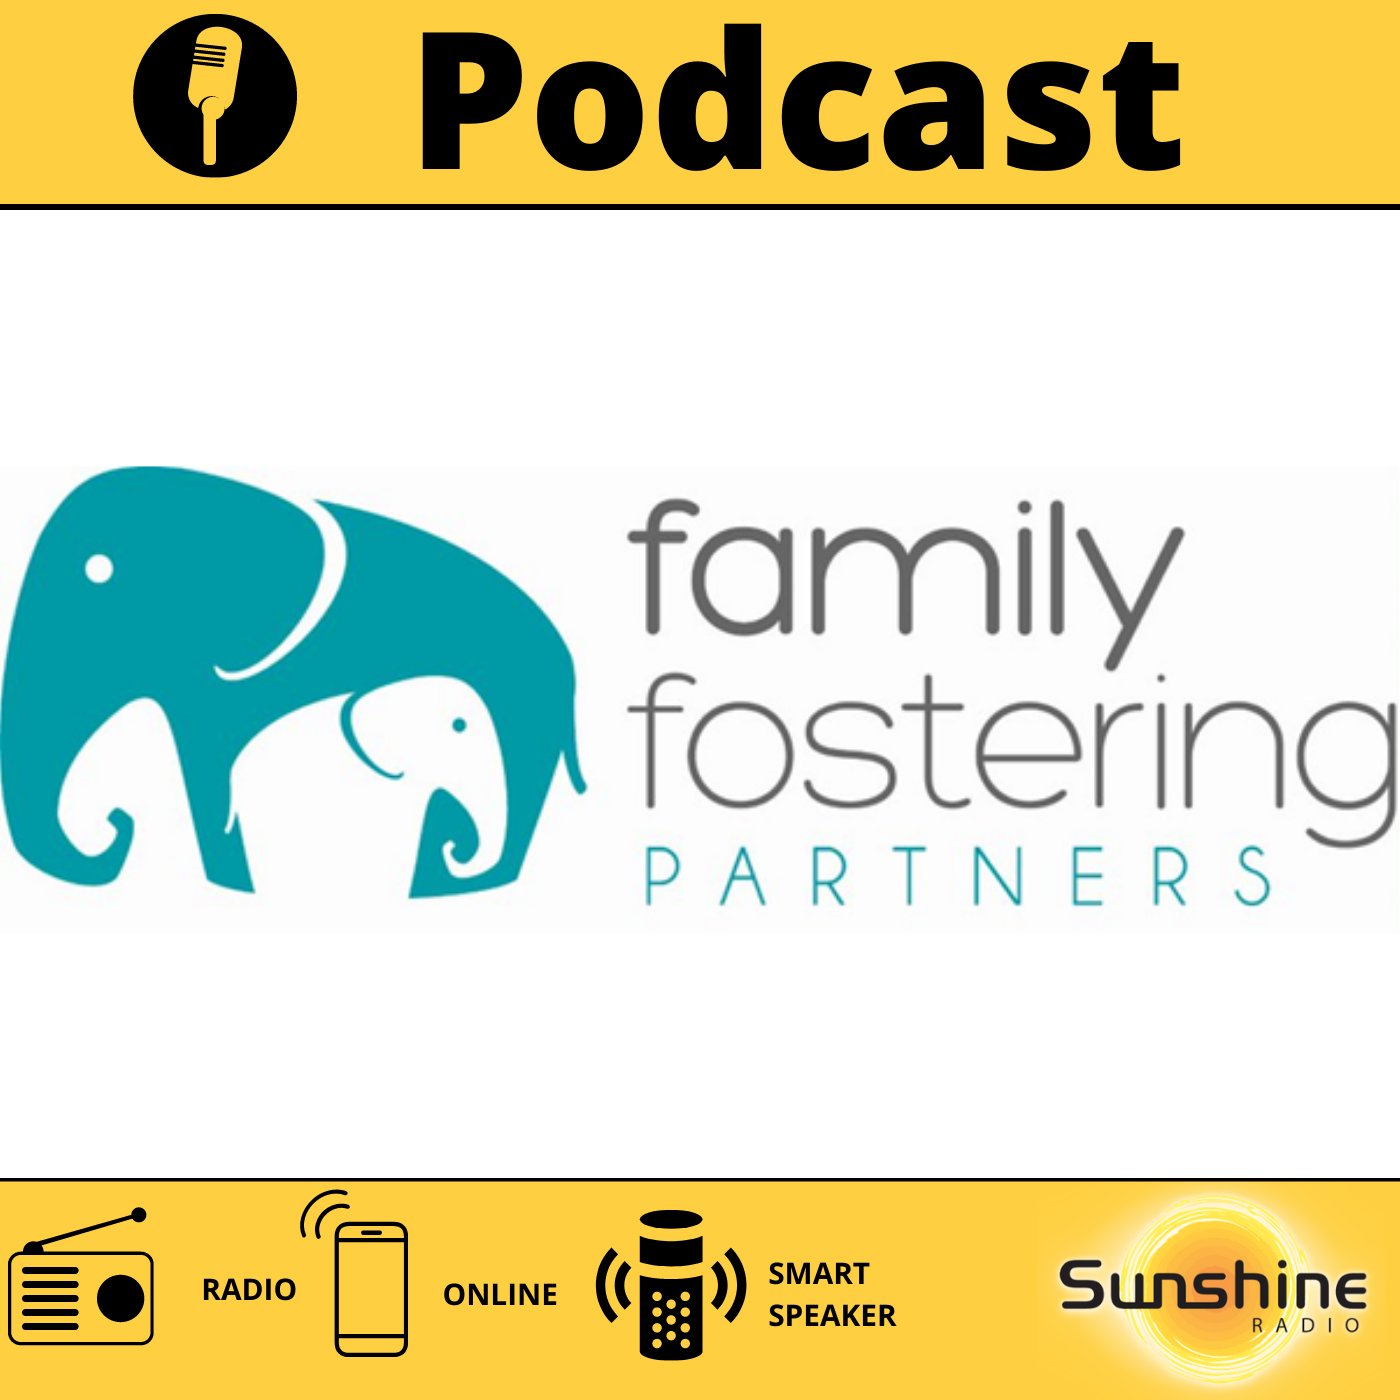 Information from Family Fostering Partners